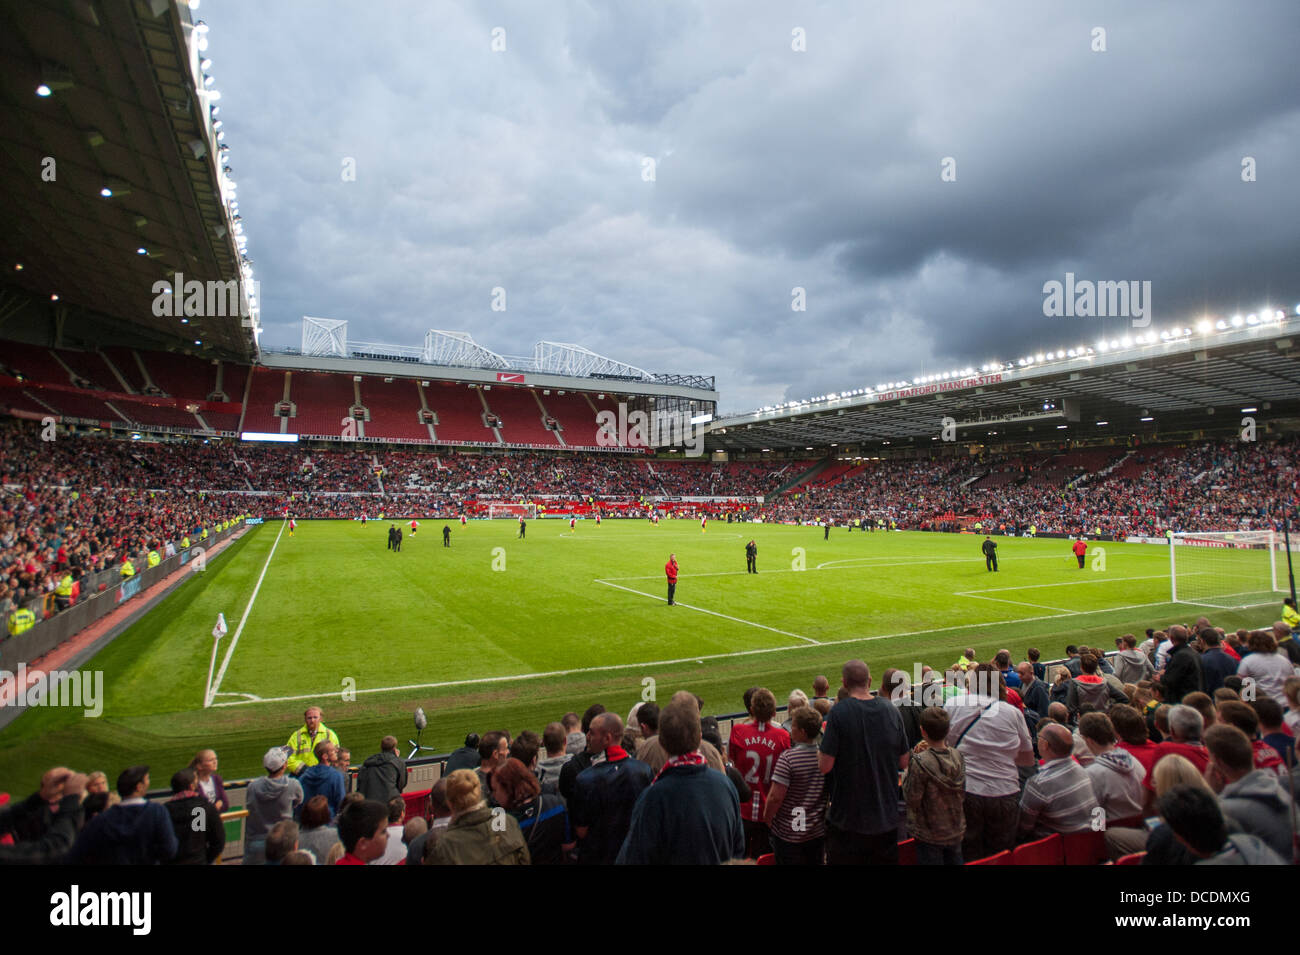 Old Trafford. Manchester United Football Club. Banque D'Images